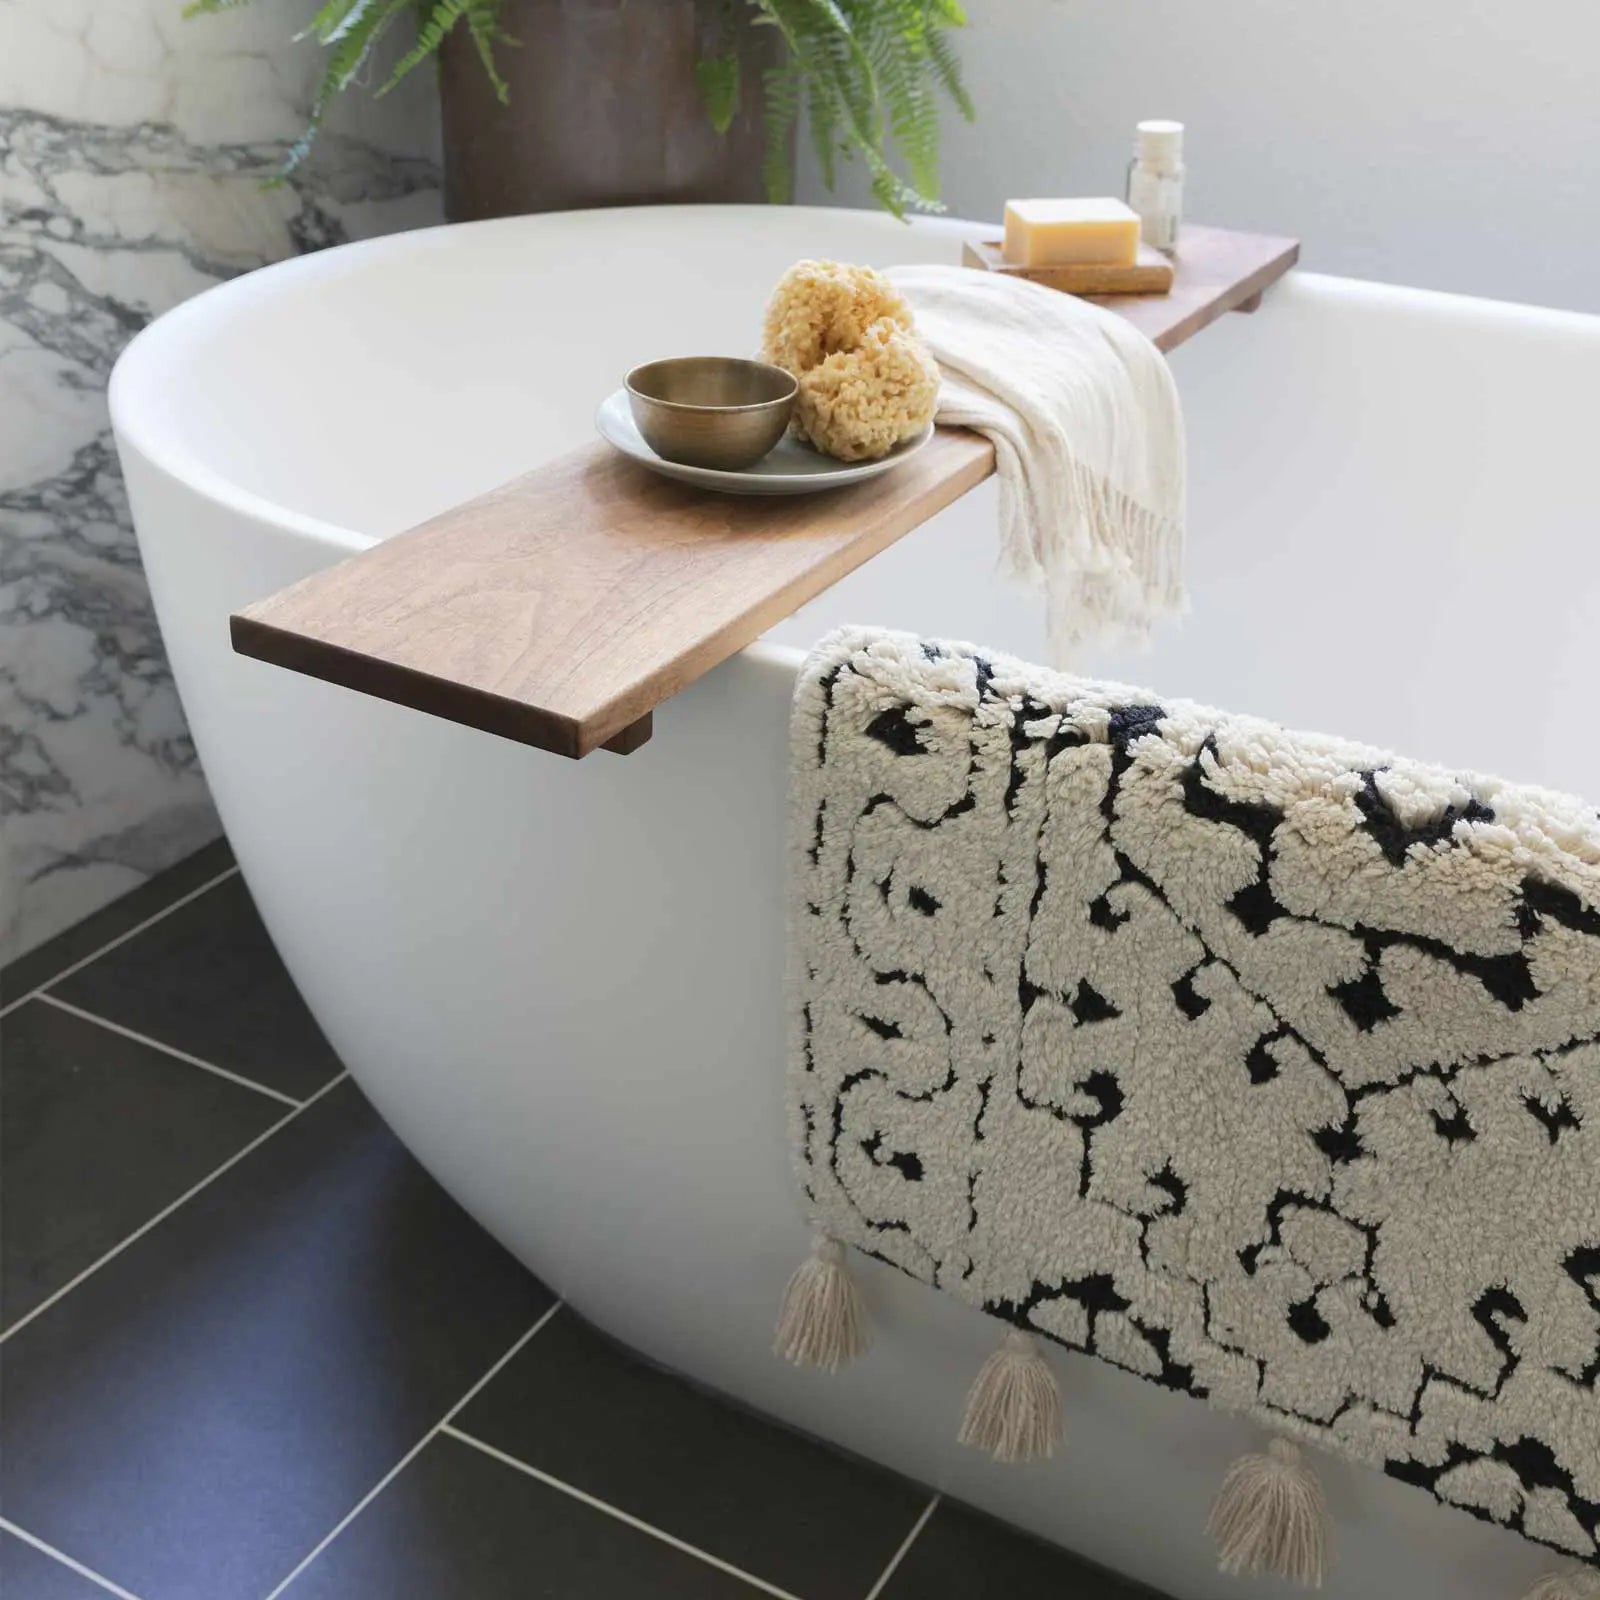 Arden noir black and white persian rug pattern bath mat in size 21x34 hanging over the side of a tub with wooden spa shelf laying across the tub